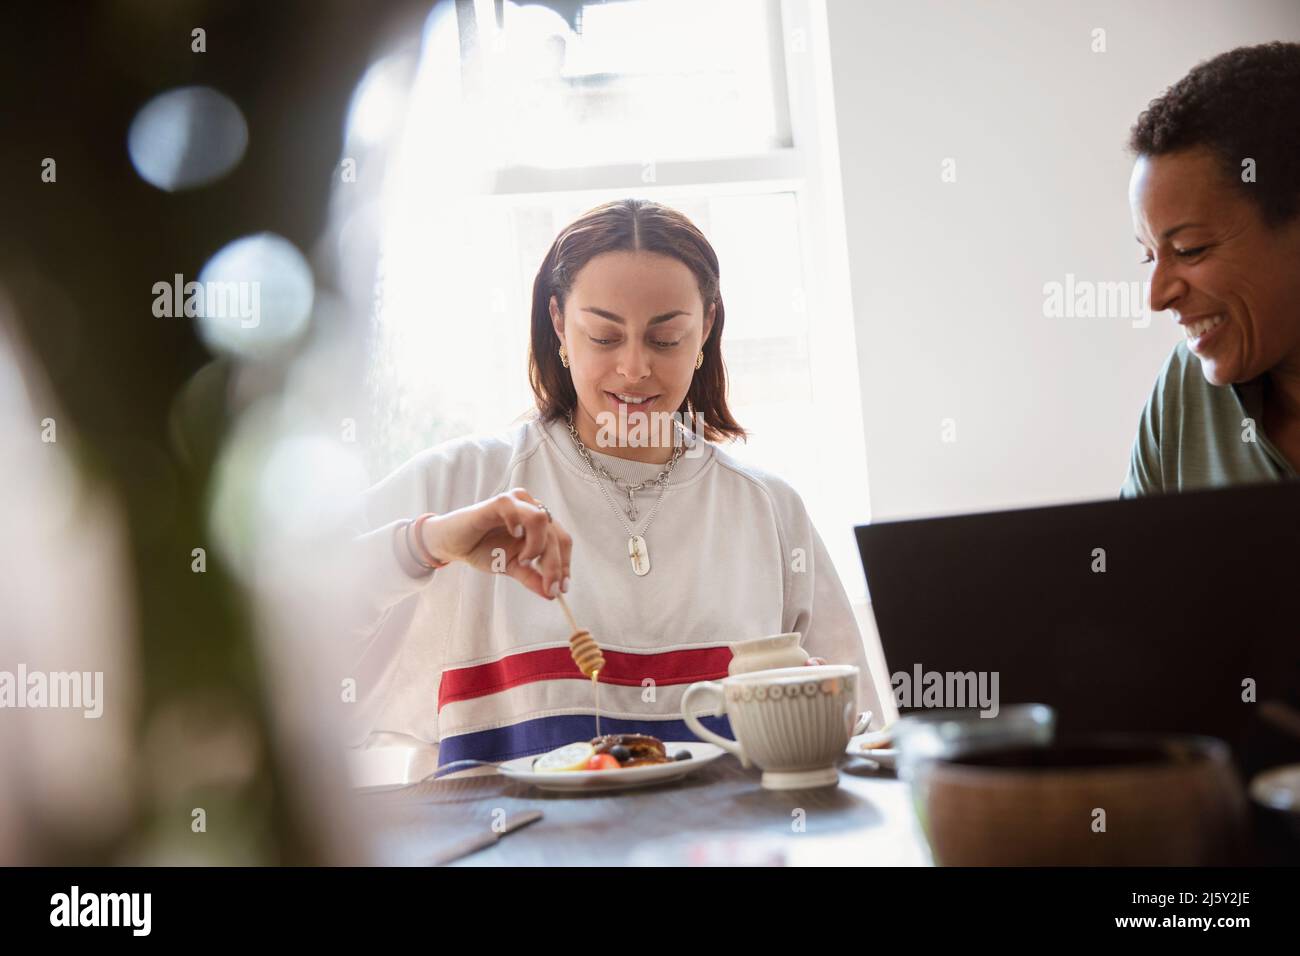 Young woman drizzling honey over breakfast at dining table Stock Photo